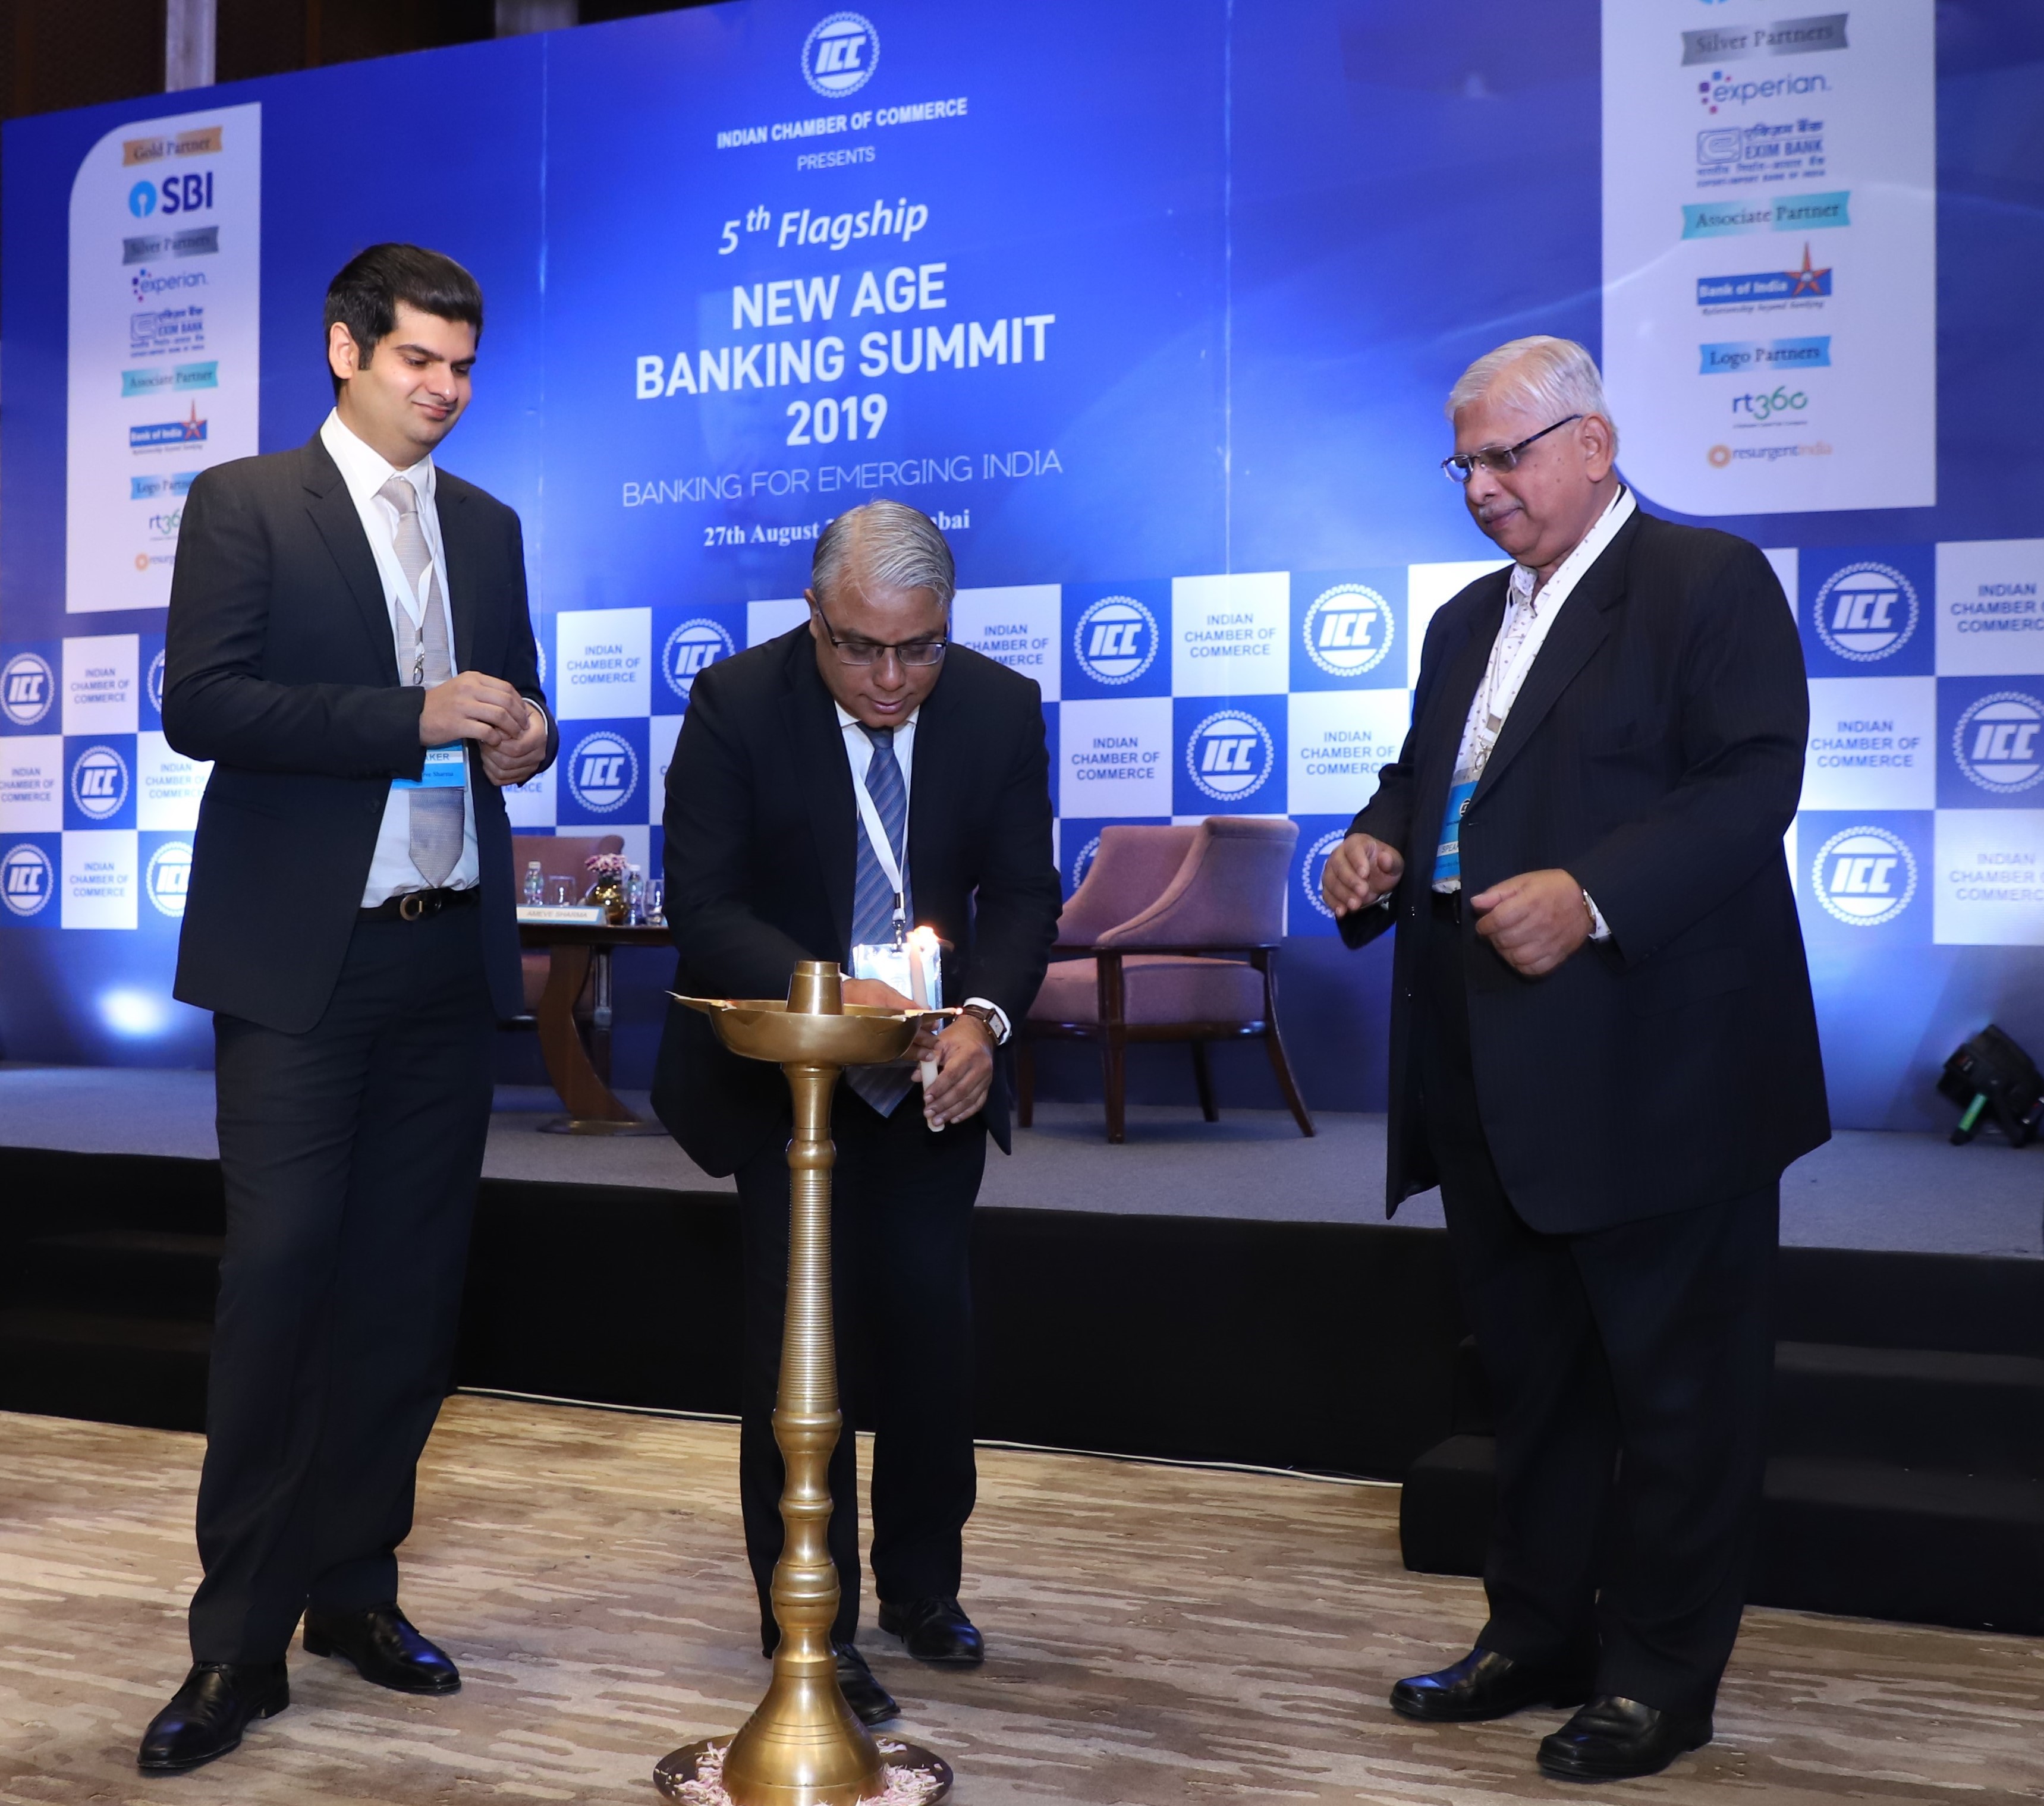 Indian Chamber of Commerce successfully hosted the 5th Edition of its Banking Summit on 27th August 2019 in Mumbai. LtoR : Mr. Ameve Sharma, President – Baidyanath Ayurved Bhawan and Chairman, ICC Western India, Shri. Arijit Basu, Managing Director- (Commercial Client Group & IT) - SBI, Mr. Sudhin Roy Chowdhury, Advisor – SBI Life, IDBI Federal Life Insurance and ICC BFSI Committee member. 